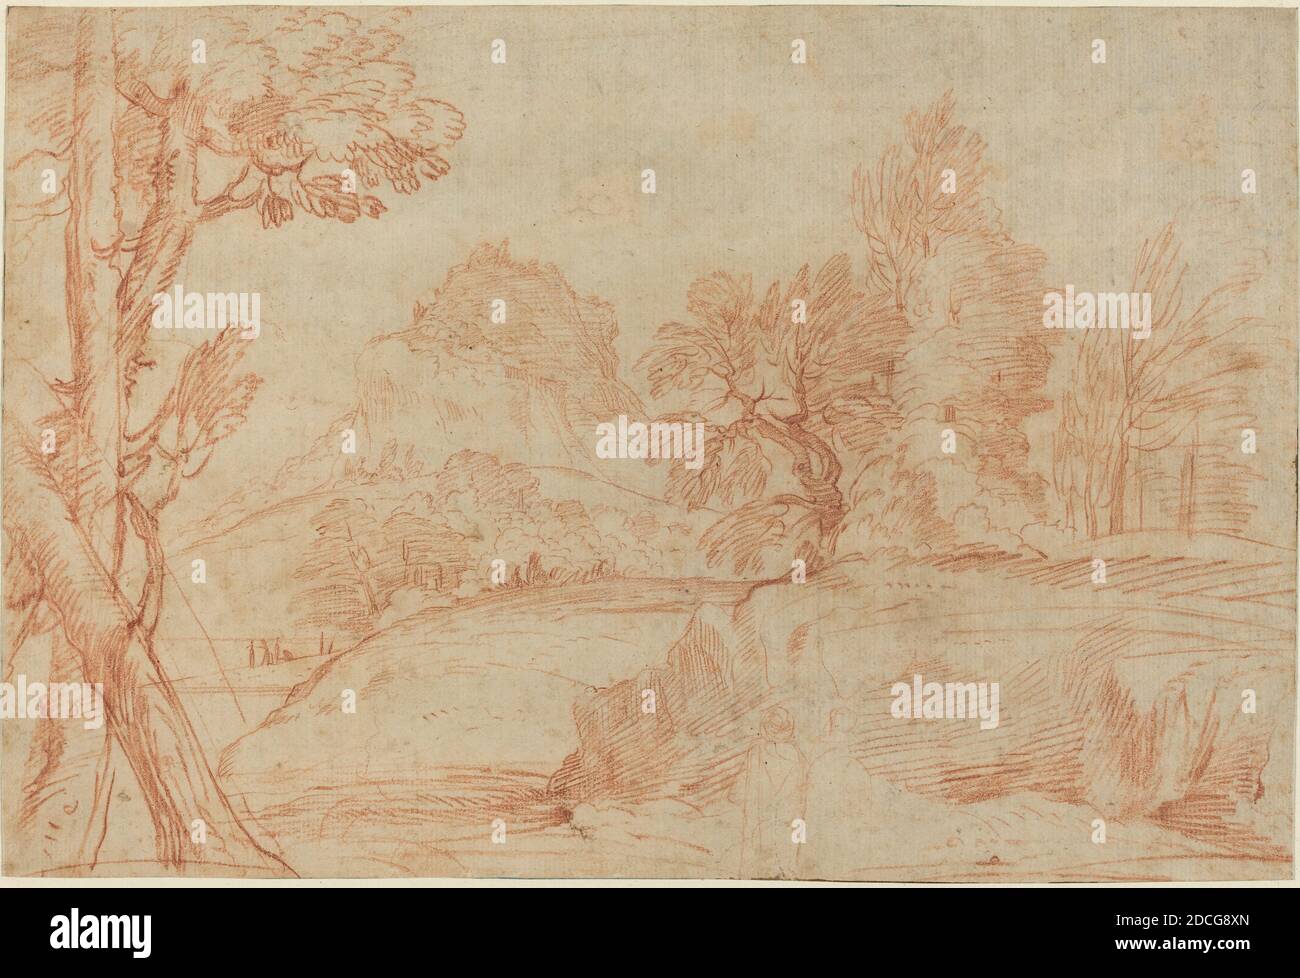 Giovanni Angelo Canini, (artist), Roman, 1609 - 1666, Classical Landscape, red chalk on laid paper, Overall (approximate): 24.4 x 36 cm (9 5/8 x 14 3/16 in.), support: 35.3 x 47.2 cm (13 7/8 x 18 9/16 in Stock Photo